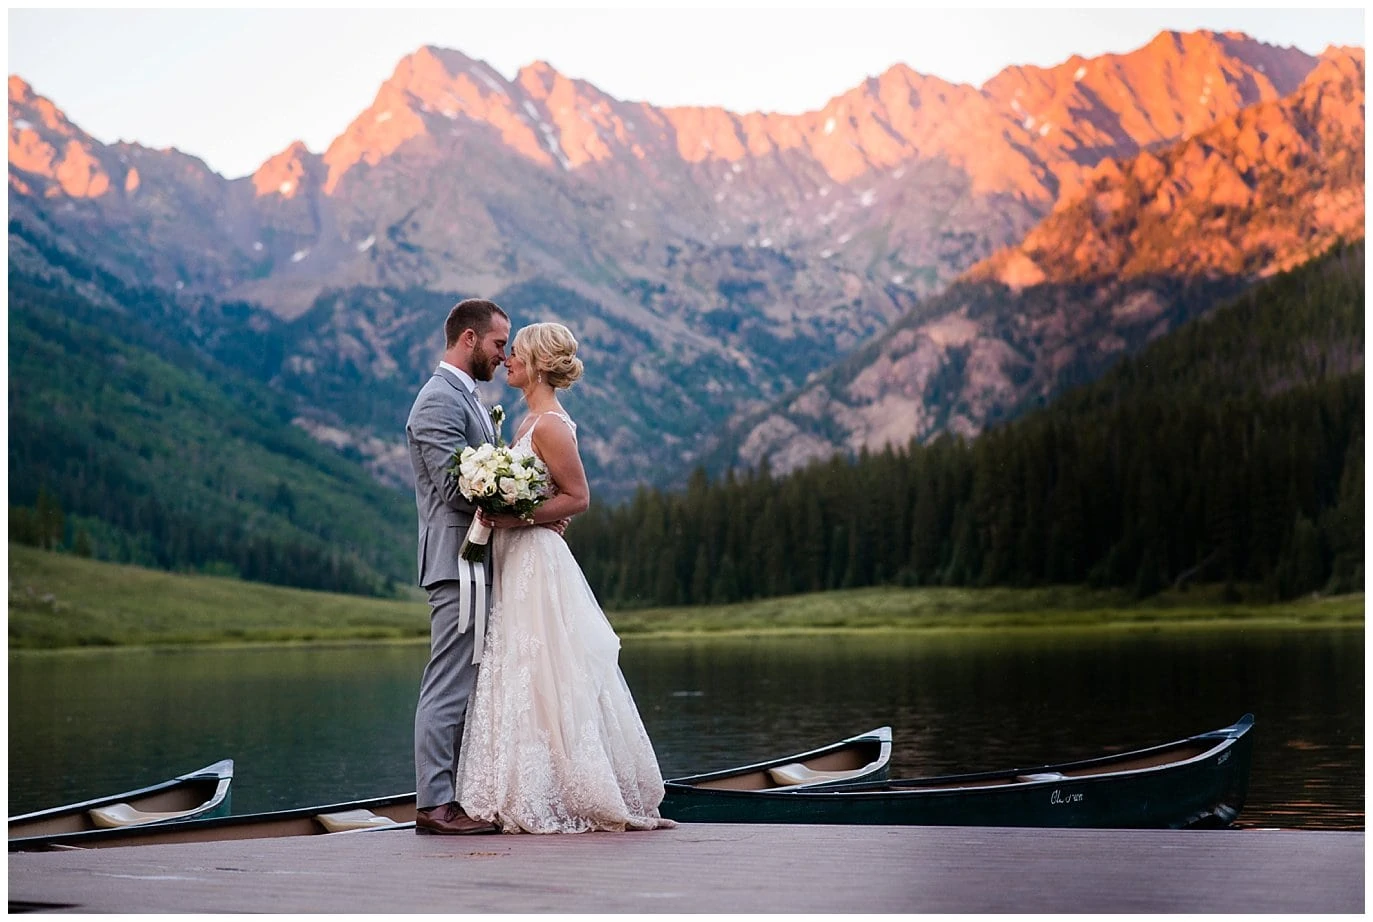 alpenglow sunset portraits on dock at Piney River Ranch wedding by Vail wedding photographer Jennie Crate, Photographer